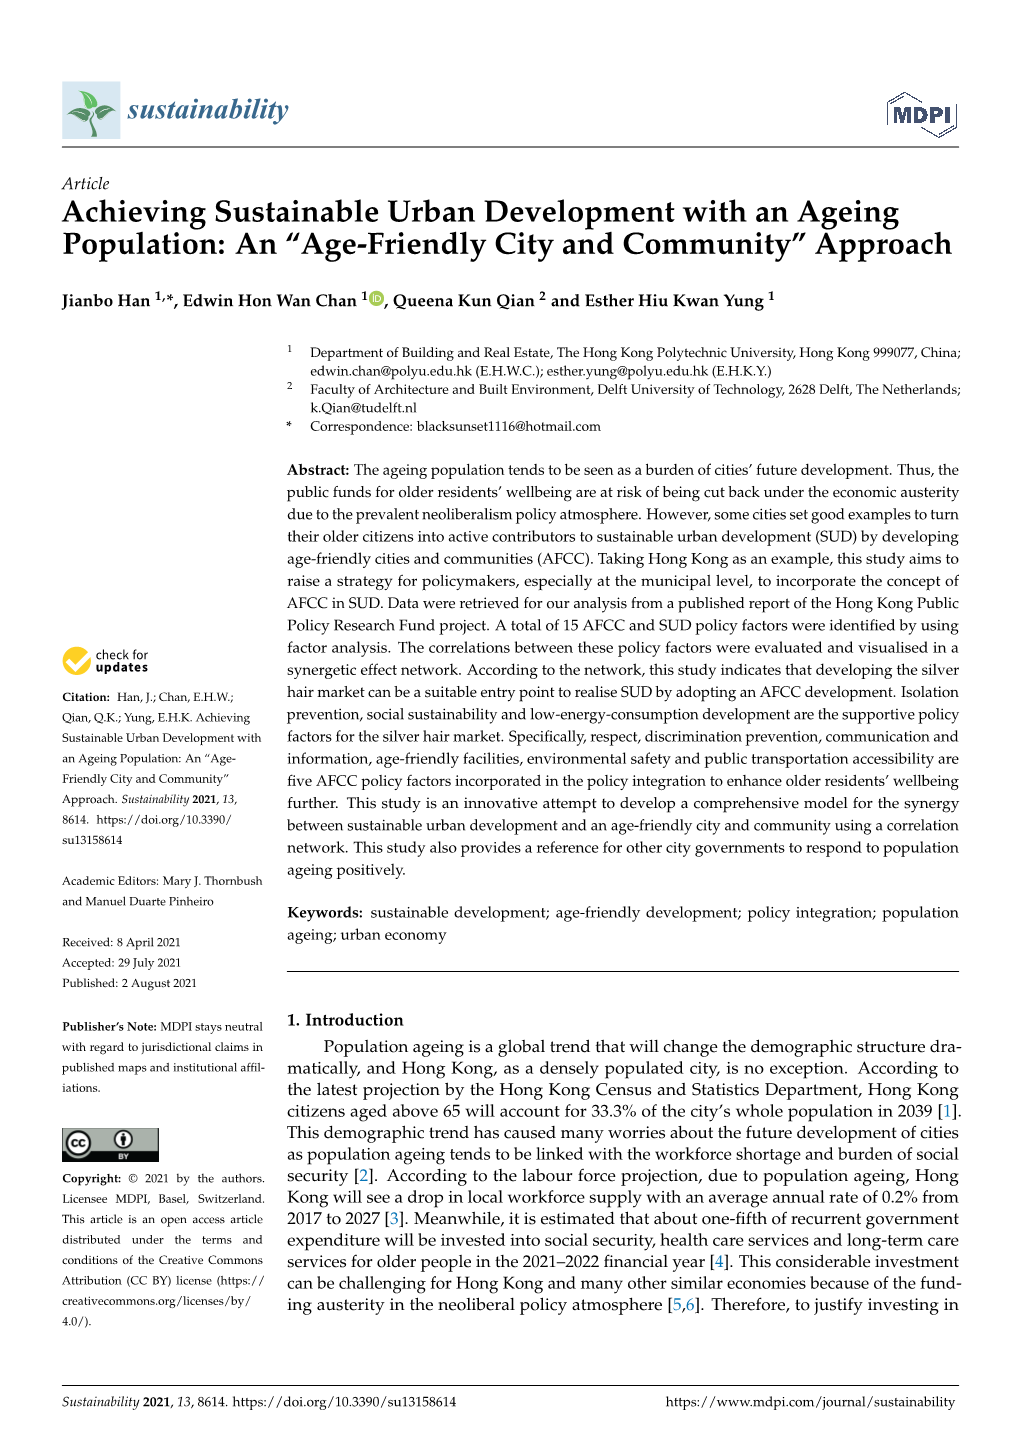 Age-Friendly City and Community” Approach